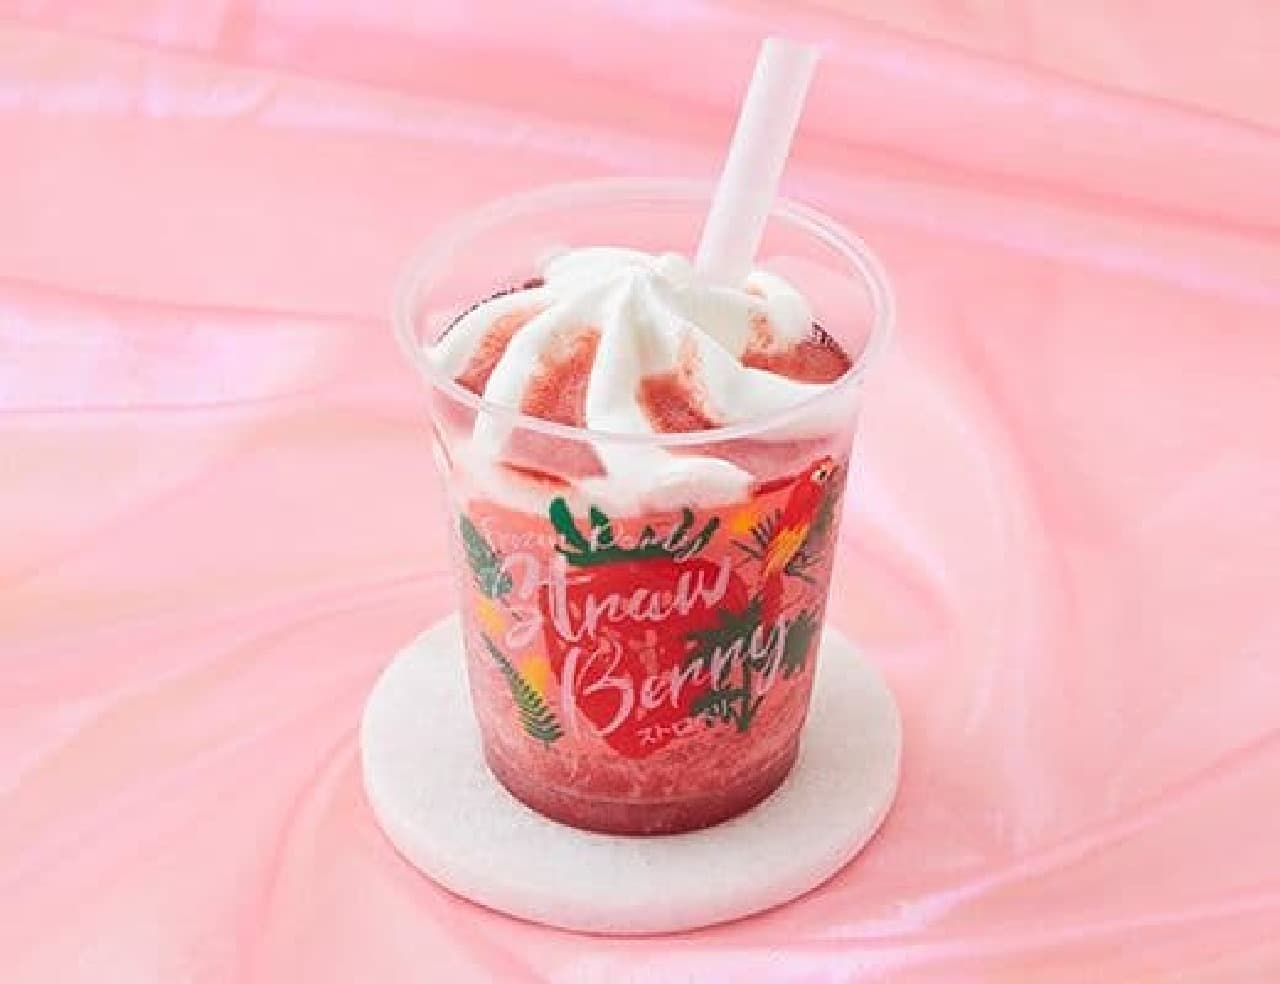 Lawson "Frozen Party Strawberry 229g